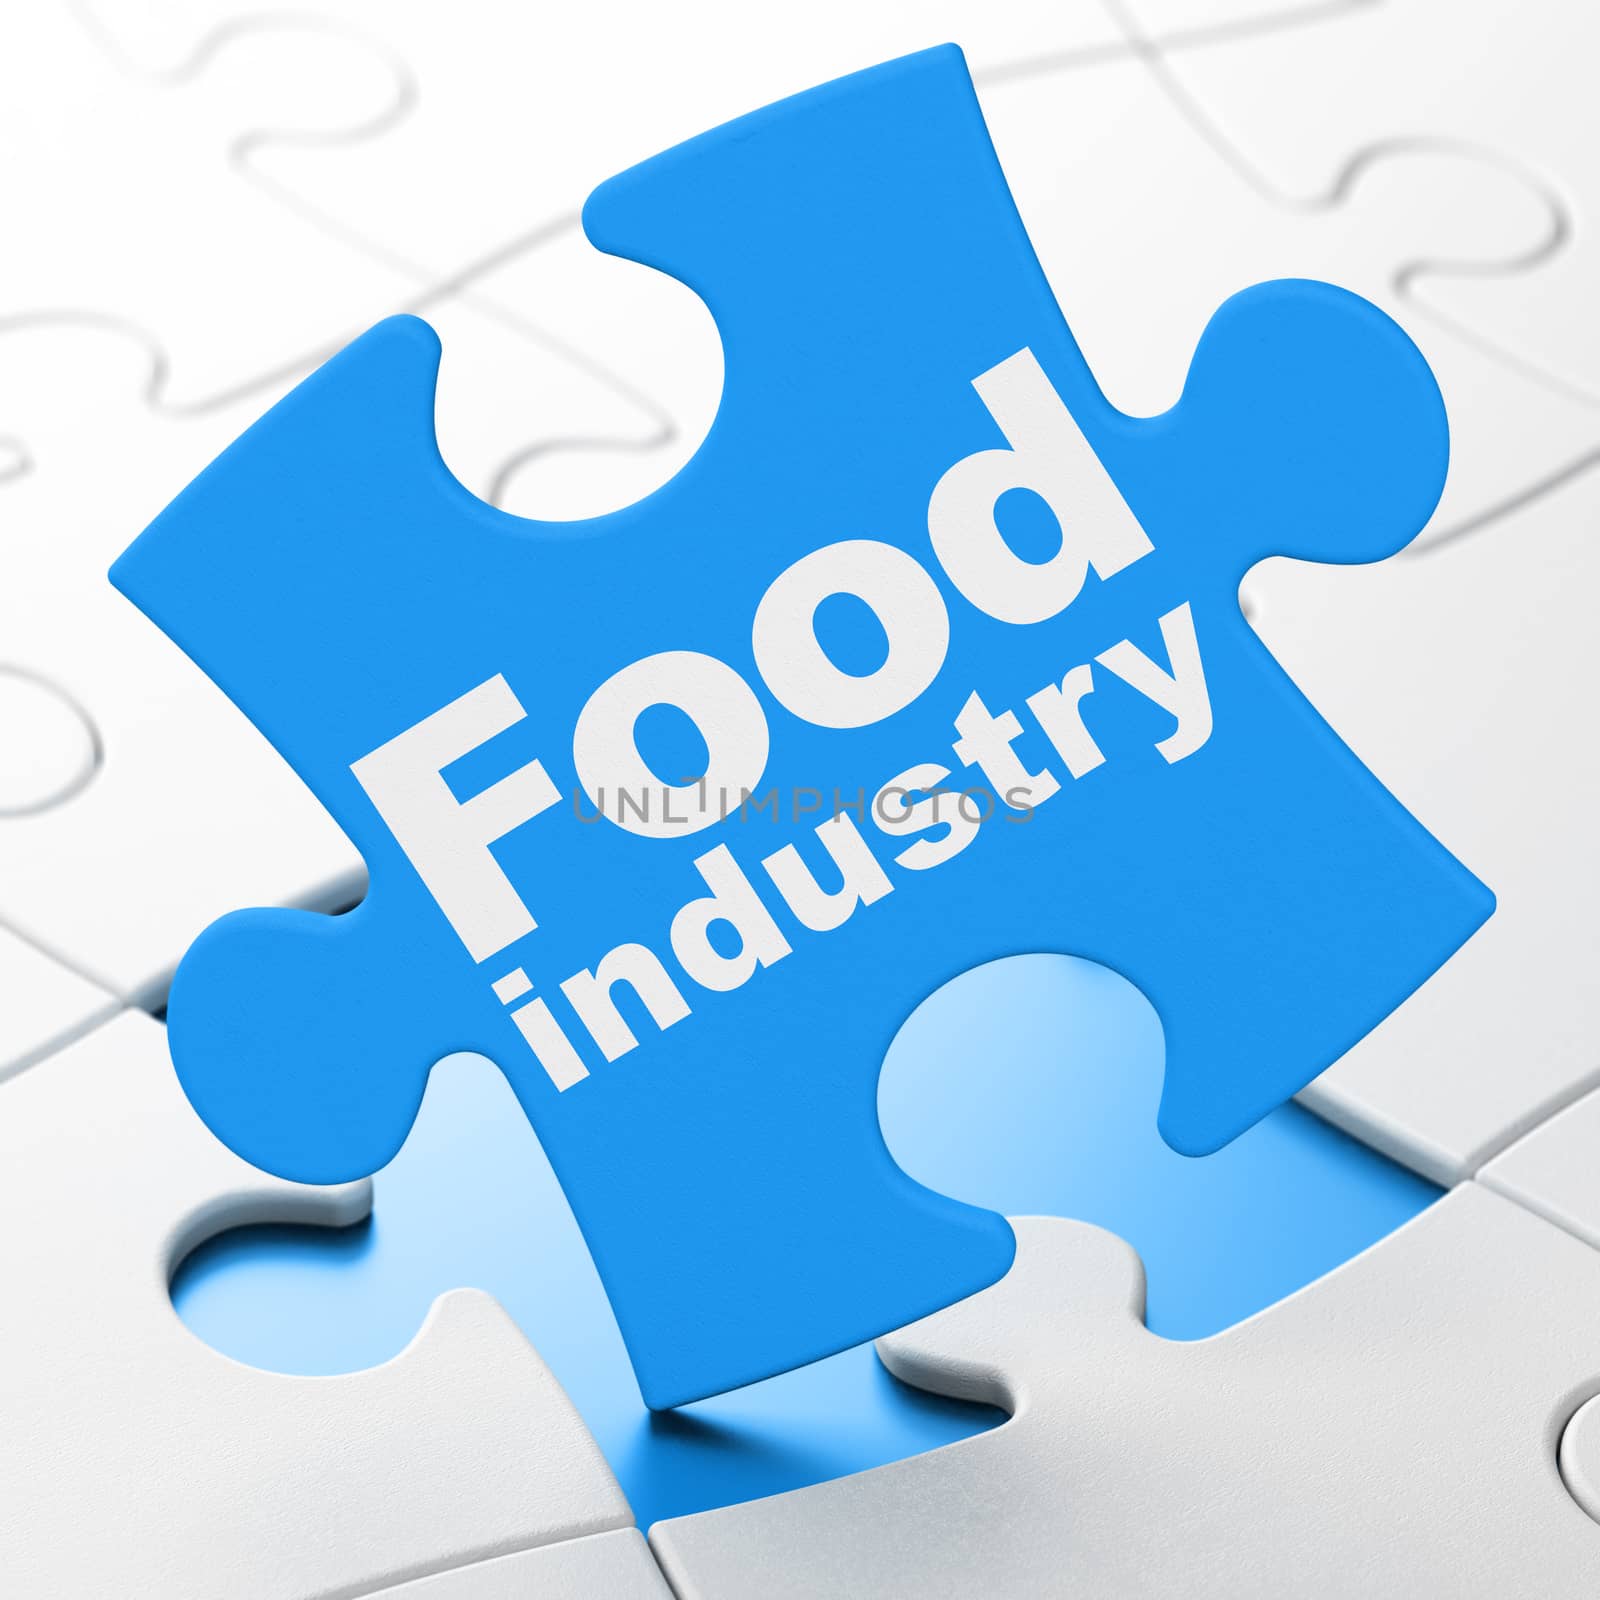 Industry concept: Food Industry on puzzle background by maxkabakov